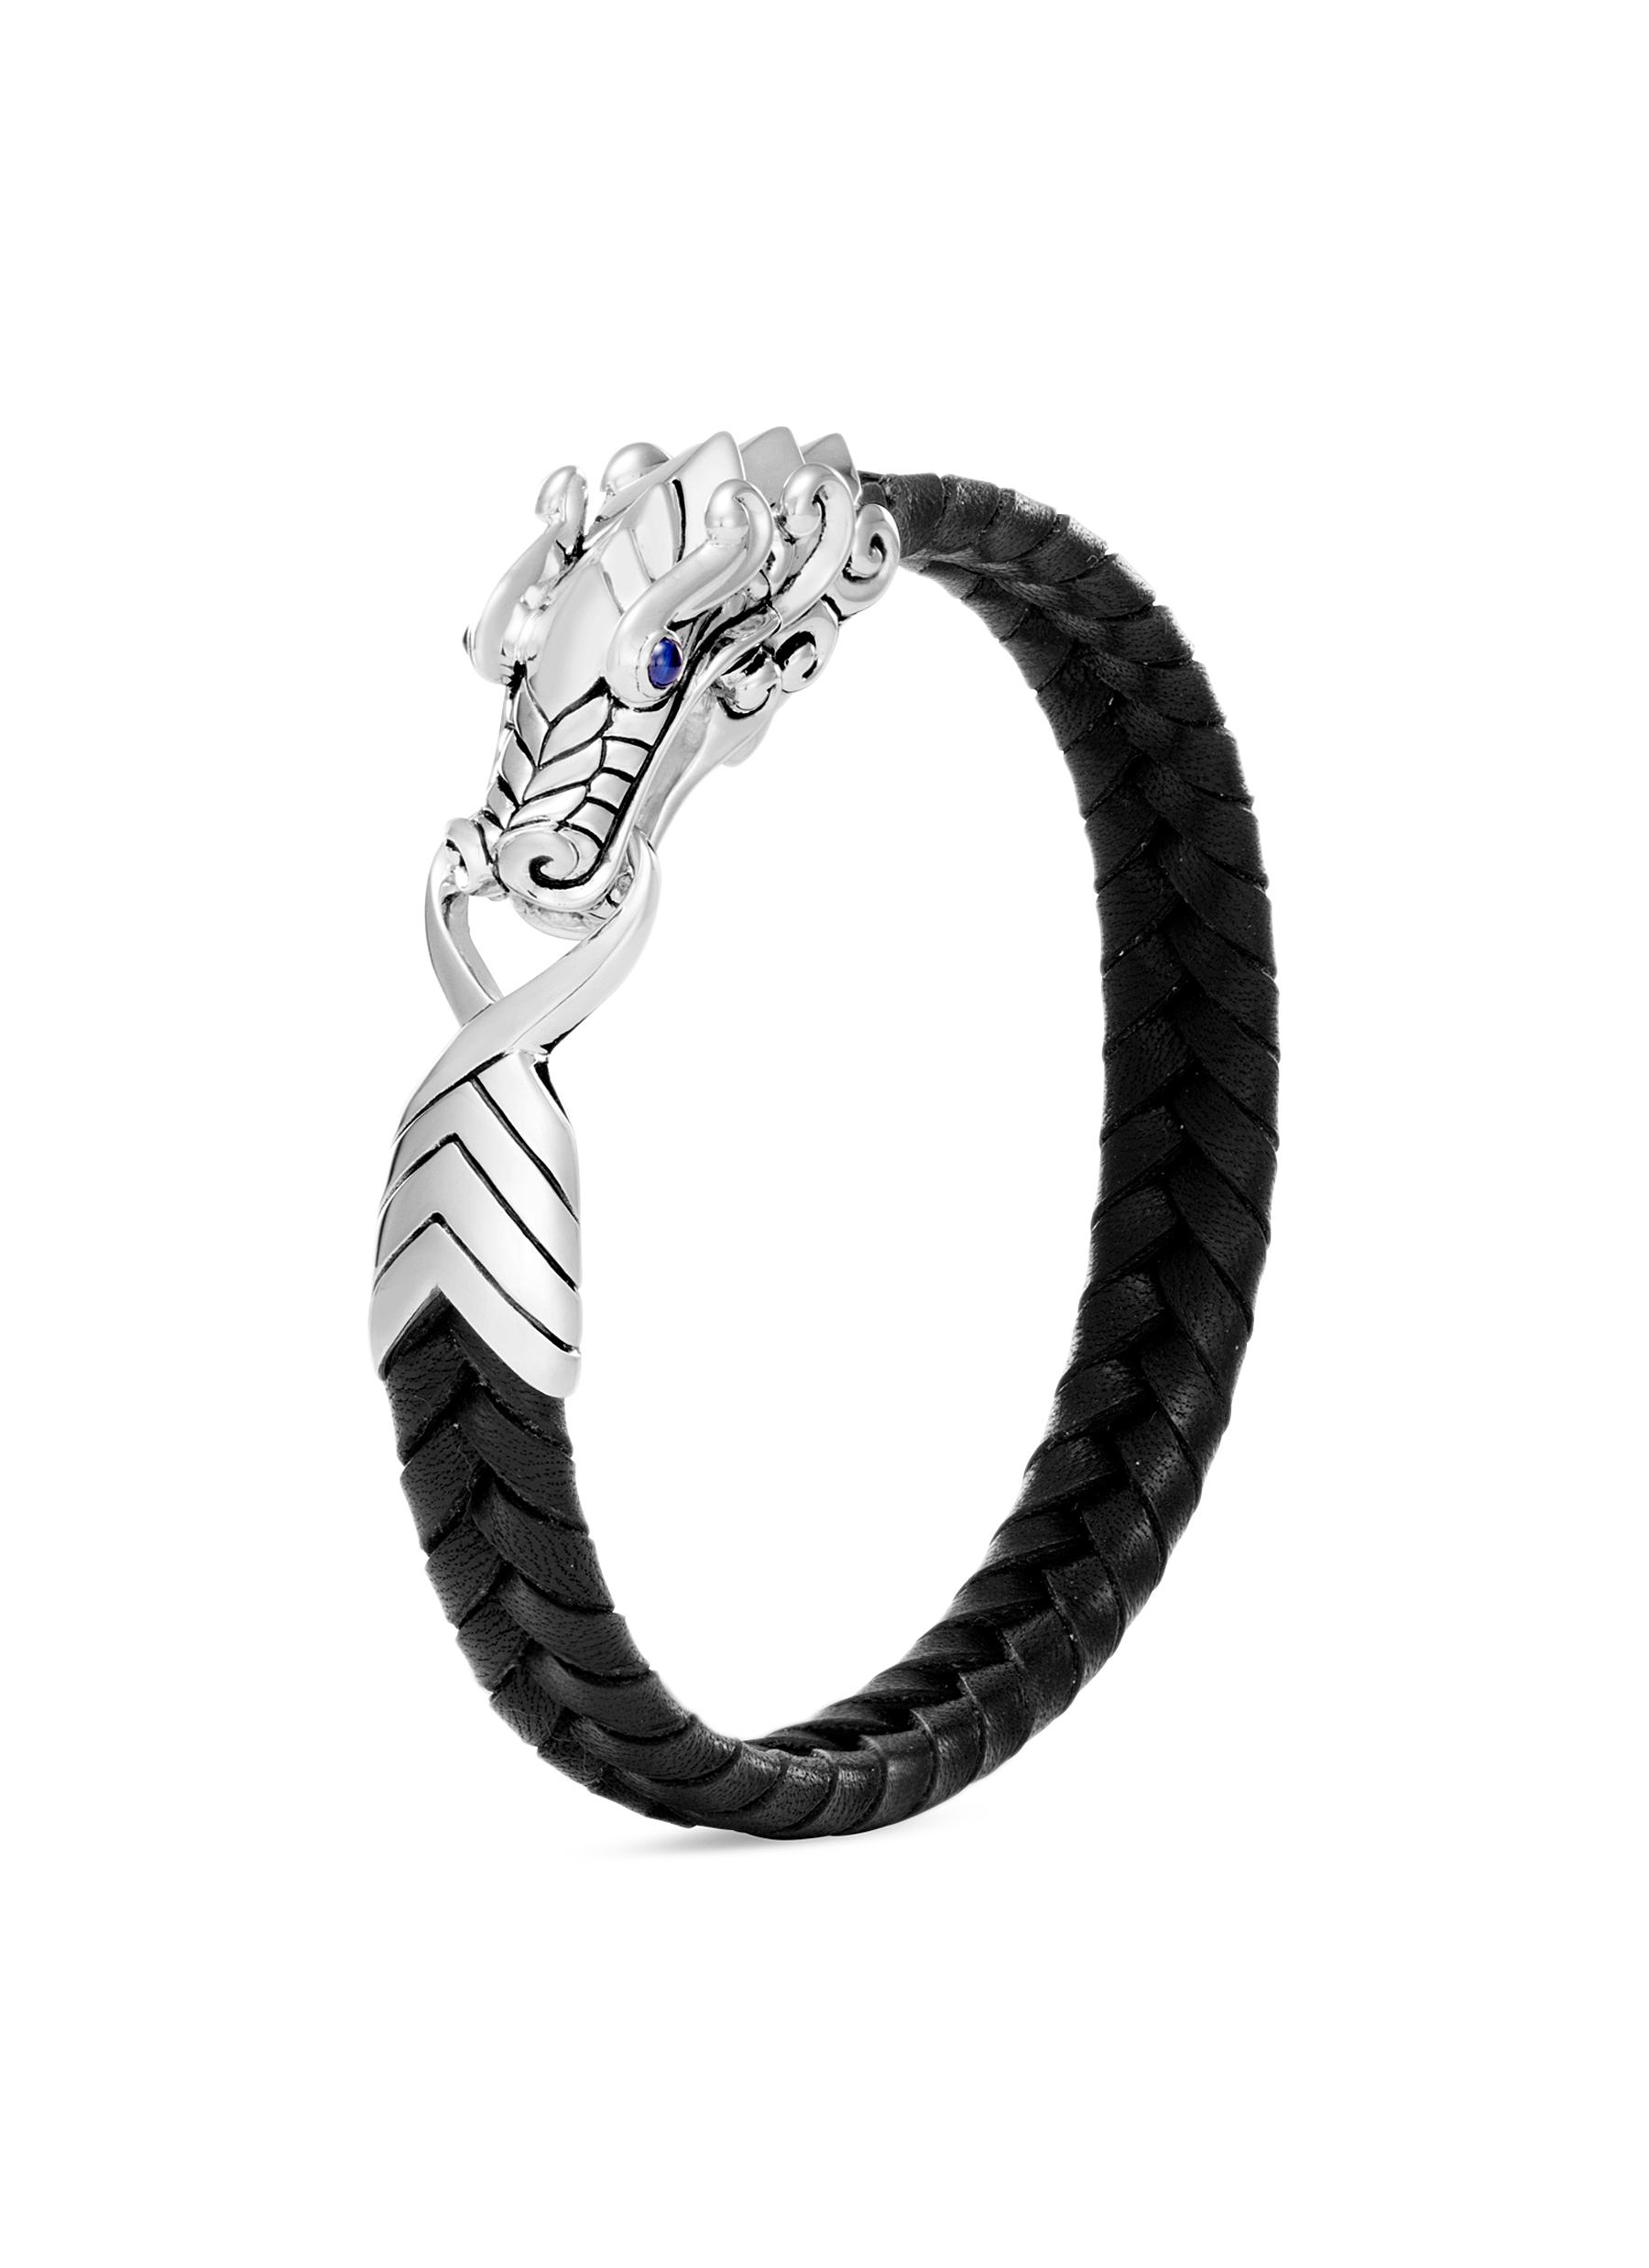 Buy Carat Sutra RARE PRINCE Exclusive 925 Sterling Silver Dark Vintage Dragon  Bracelet for Men | Bracelets For Men & Boys | With Certificate of  Authenticity and 925 Hallmark at Amazon.in